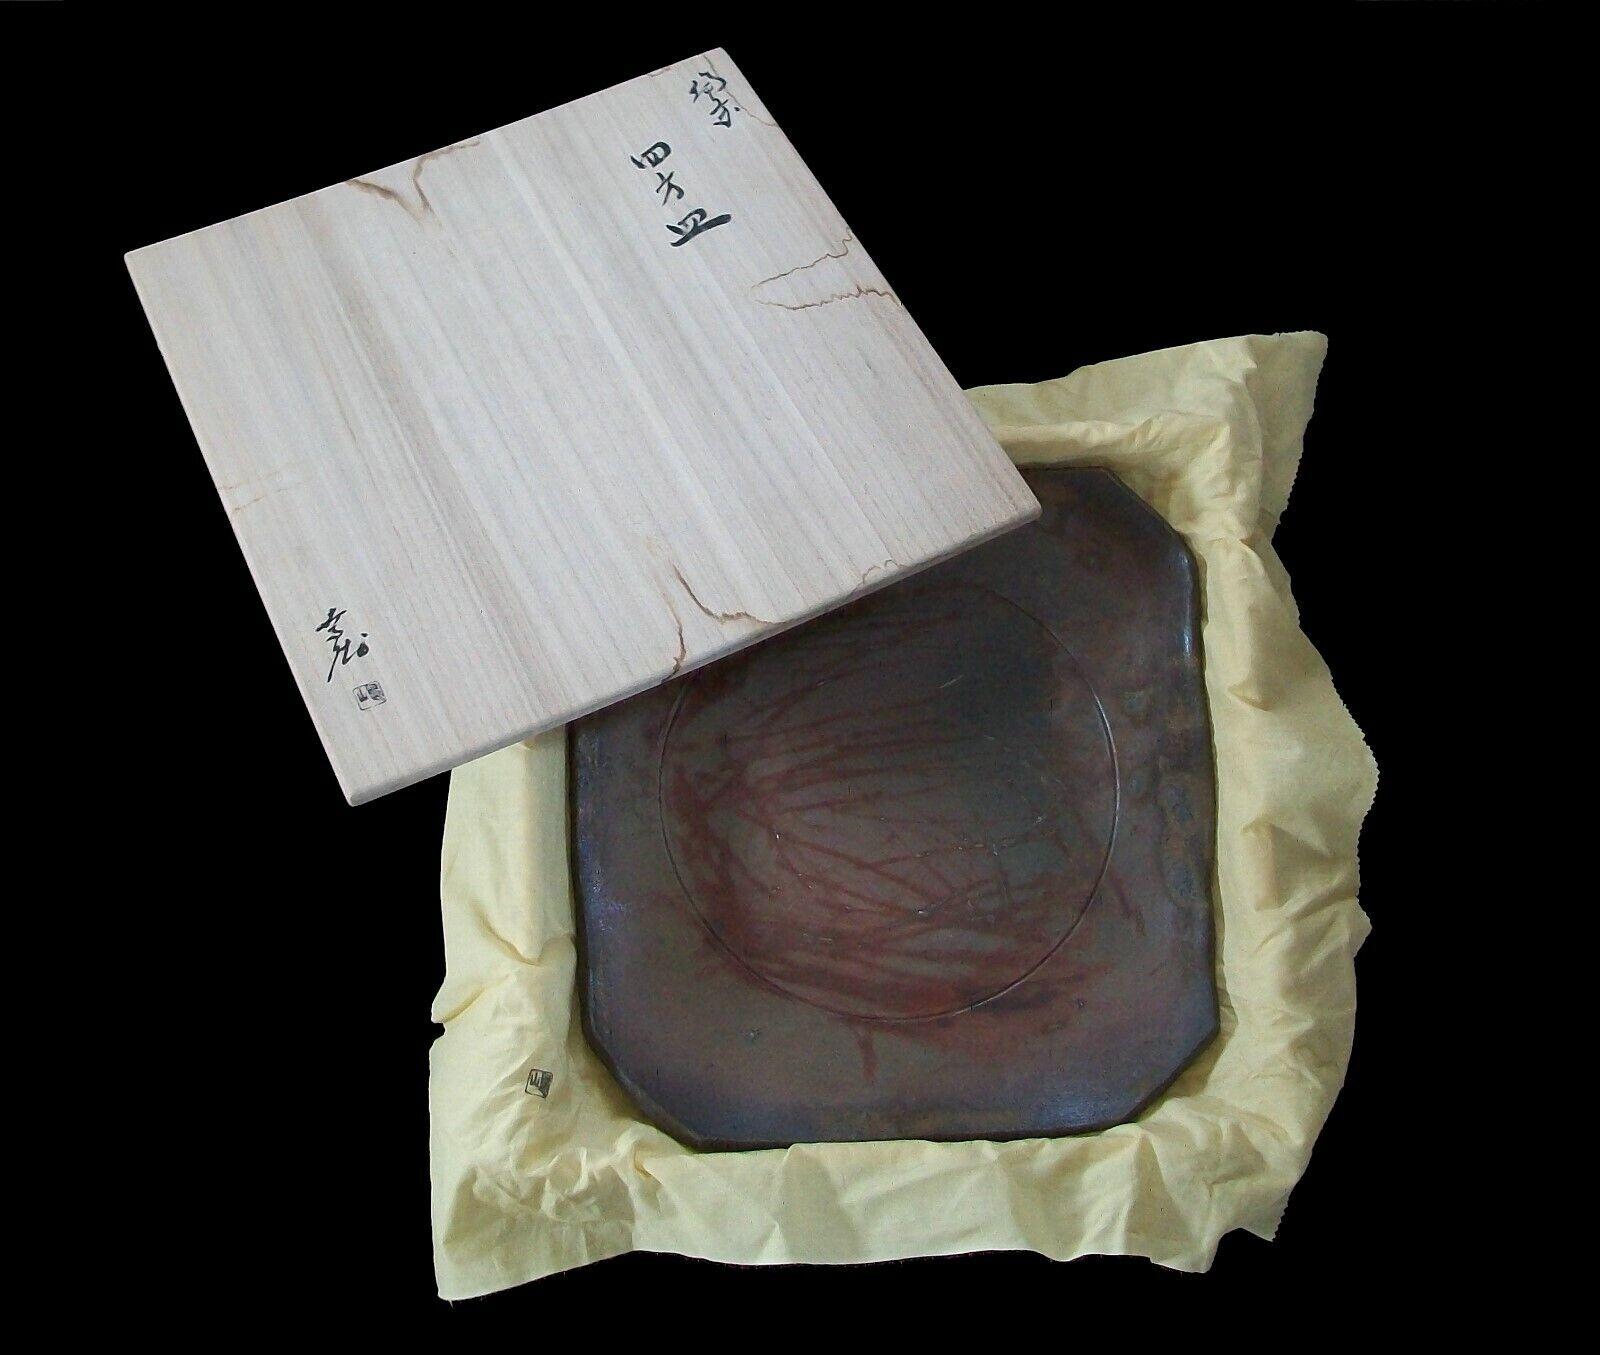 Bizen ware studio pottery 'wood fired' charger - impressive size - slightly irregular shape but presents itself as square - scored central circle and base - smoke and flame licked surface - contained in the original signed cedar presentation box and